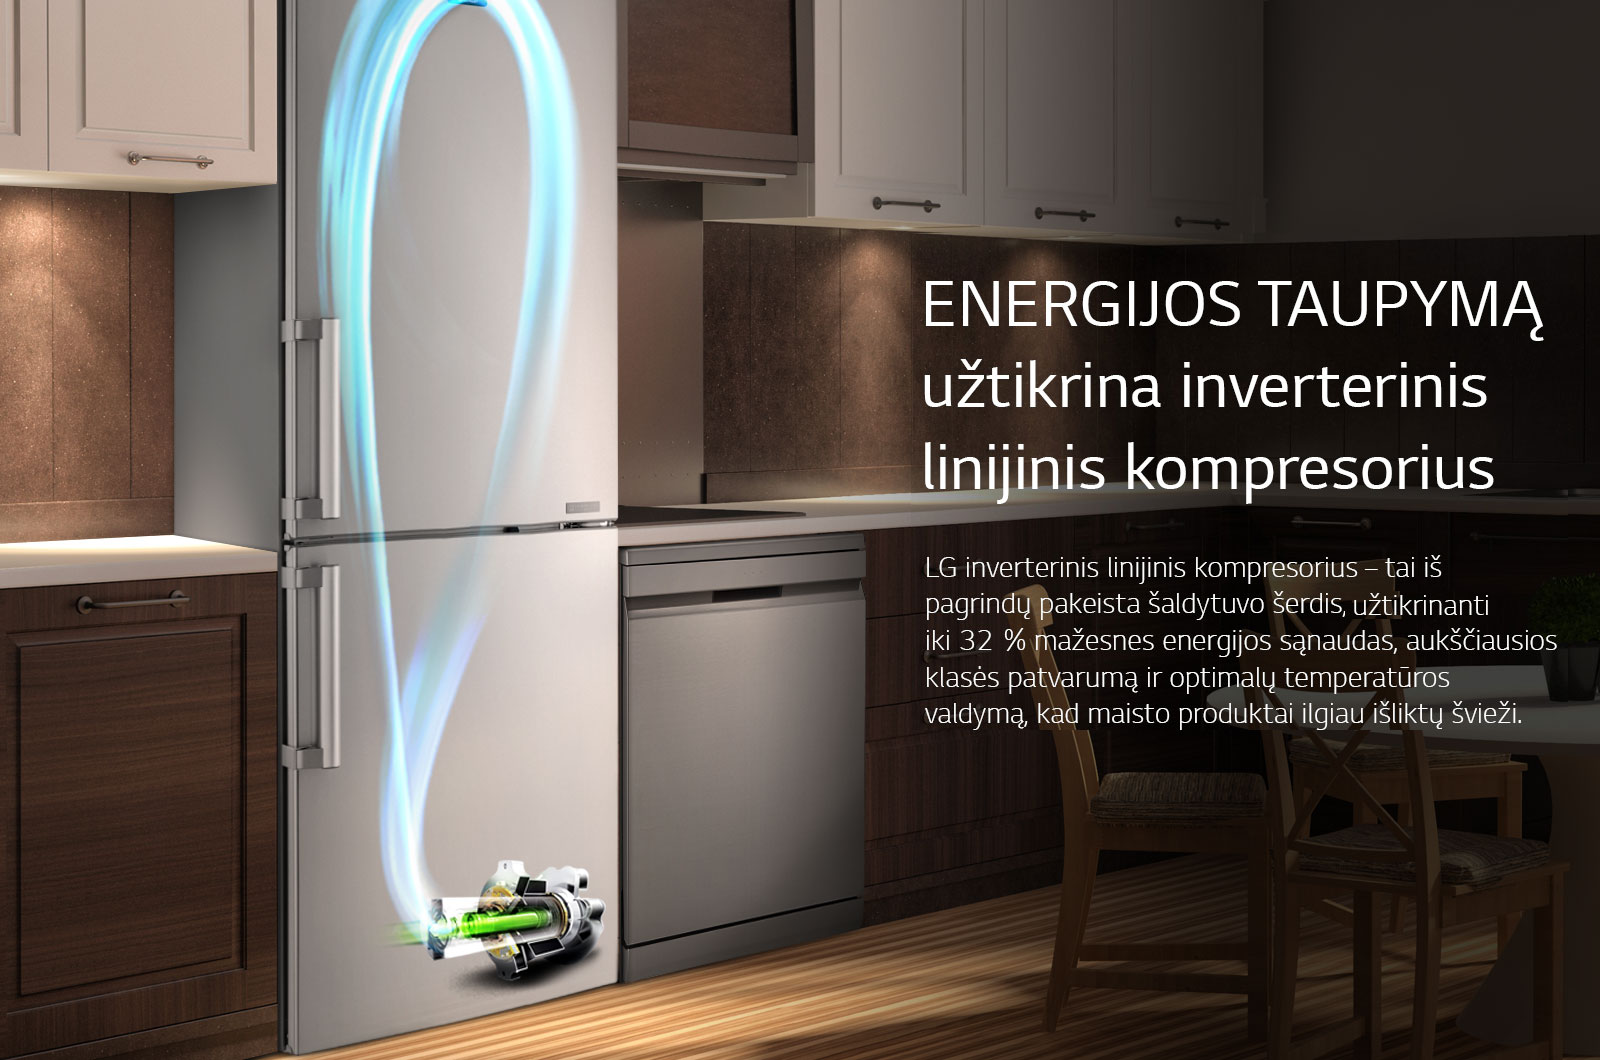 Energy Saving with Inverter Linear Compressor